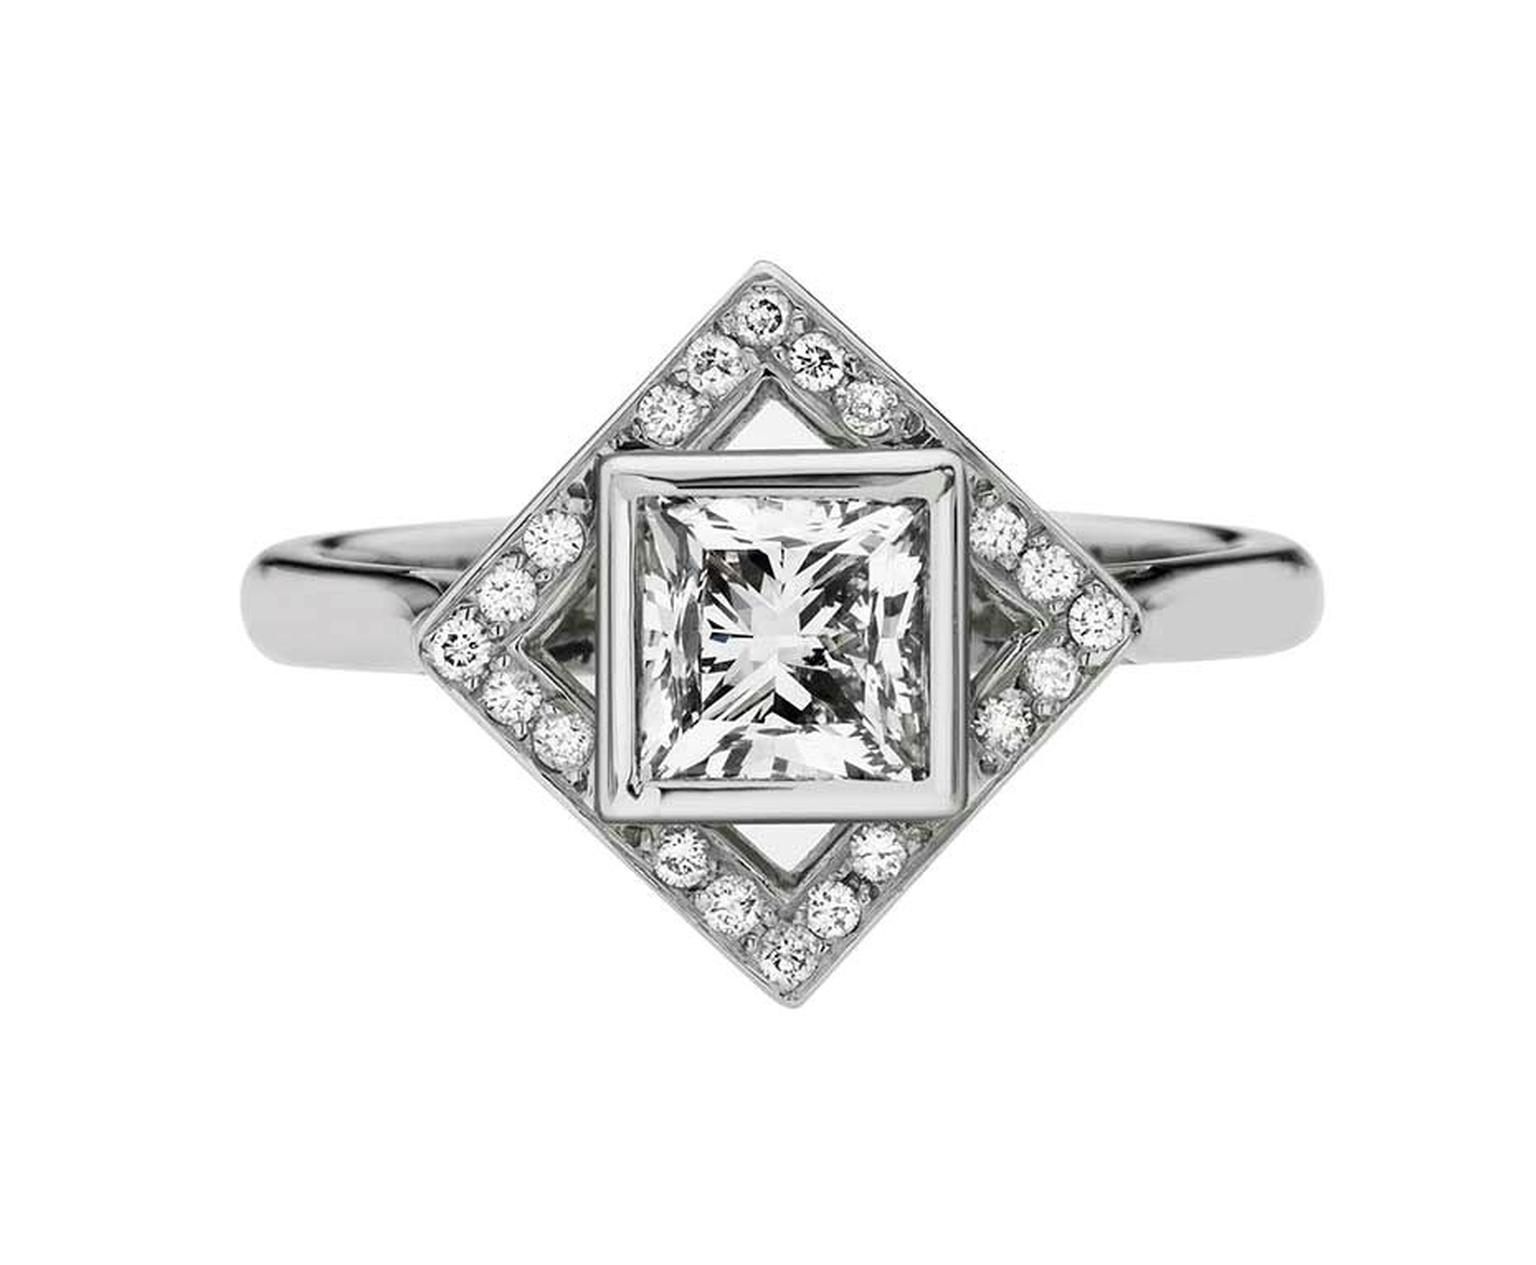 Ethan and Co. princess-cut diamond solitaire ring surrounded by a square of diamond pavé tilted at a different angle to the central stone.